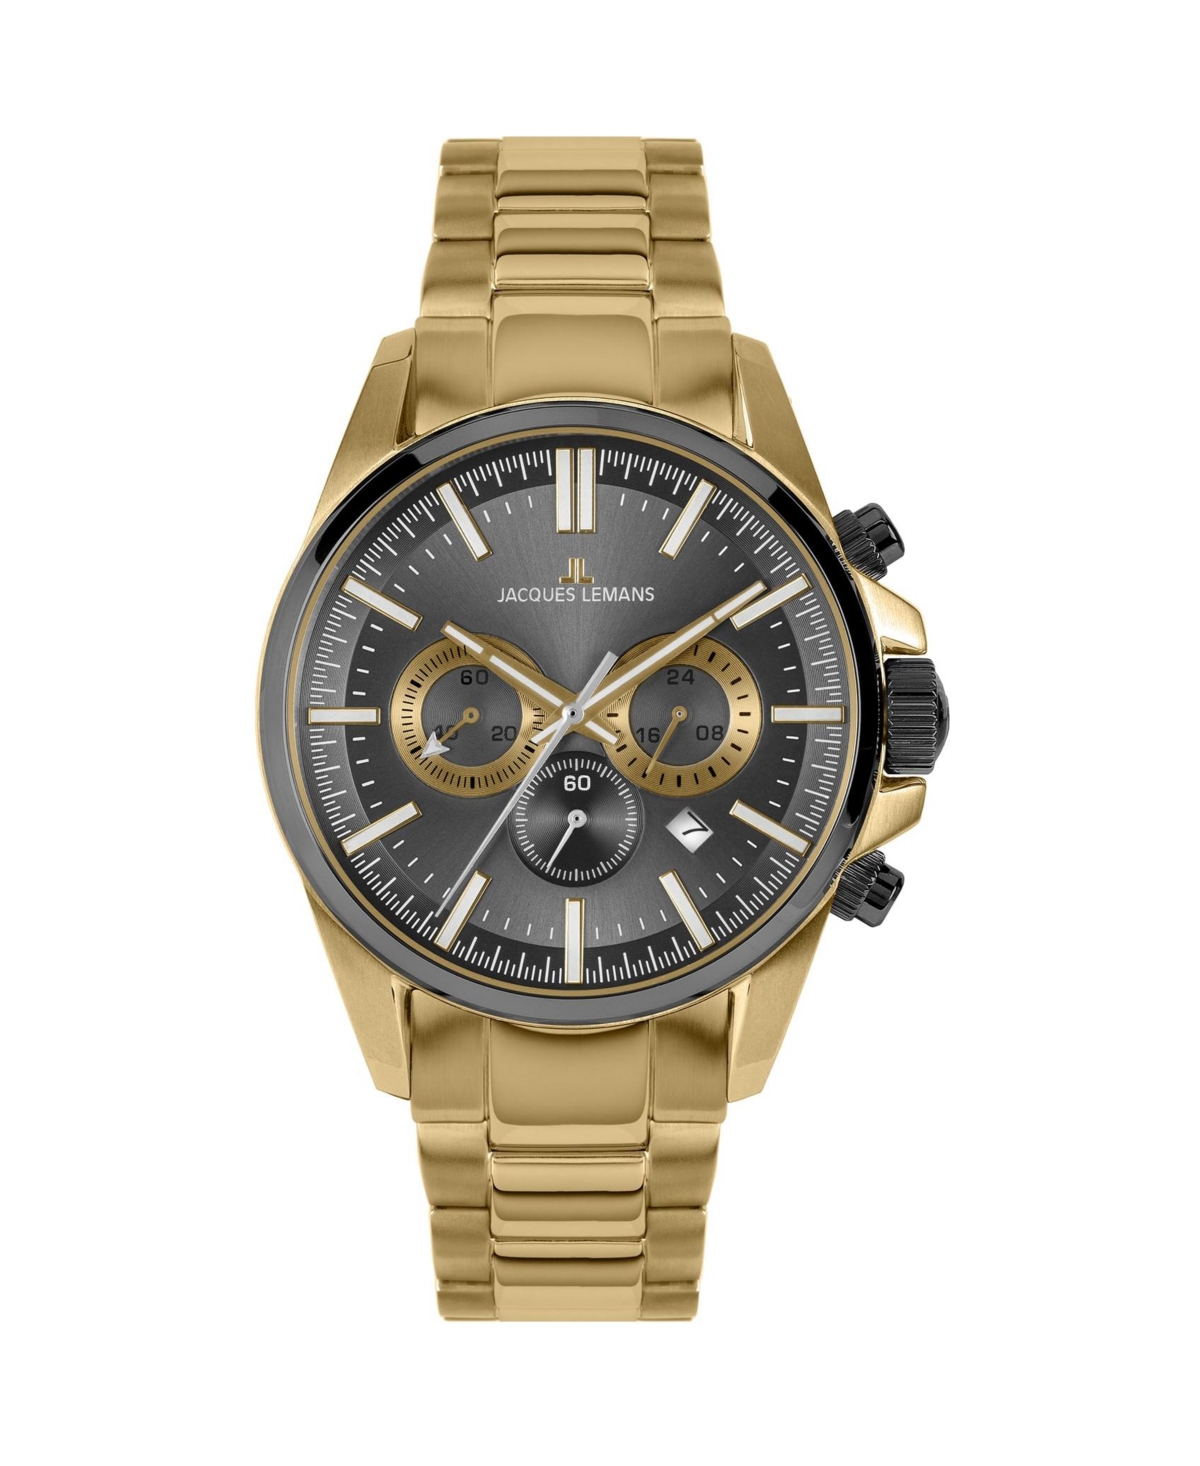 Men's Liverpool Watch with Solid Stainless Steel Strap, Ip-Grey/Ip-Gold Bicolor, Chronograph, 1-2119 - Medium grey